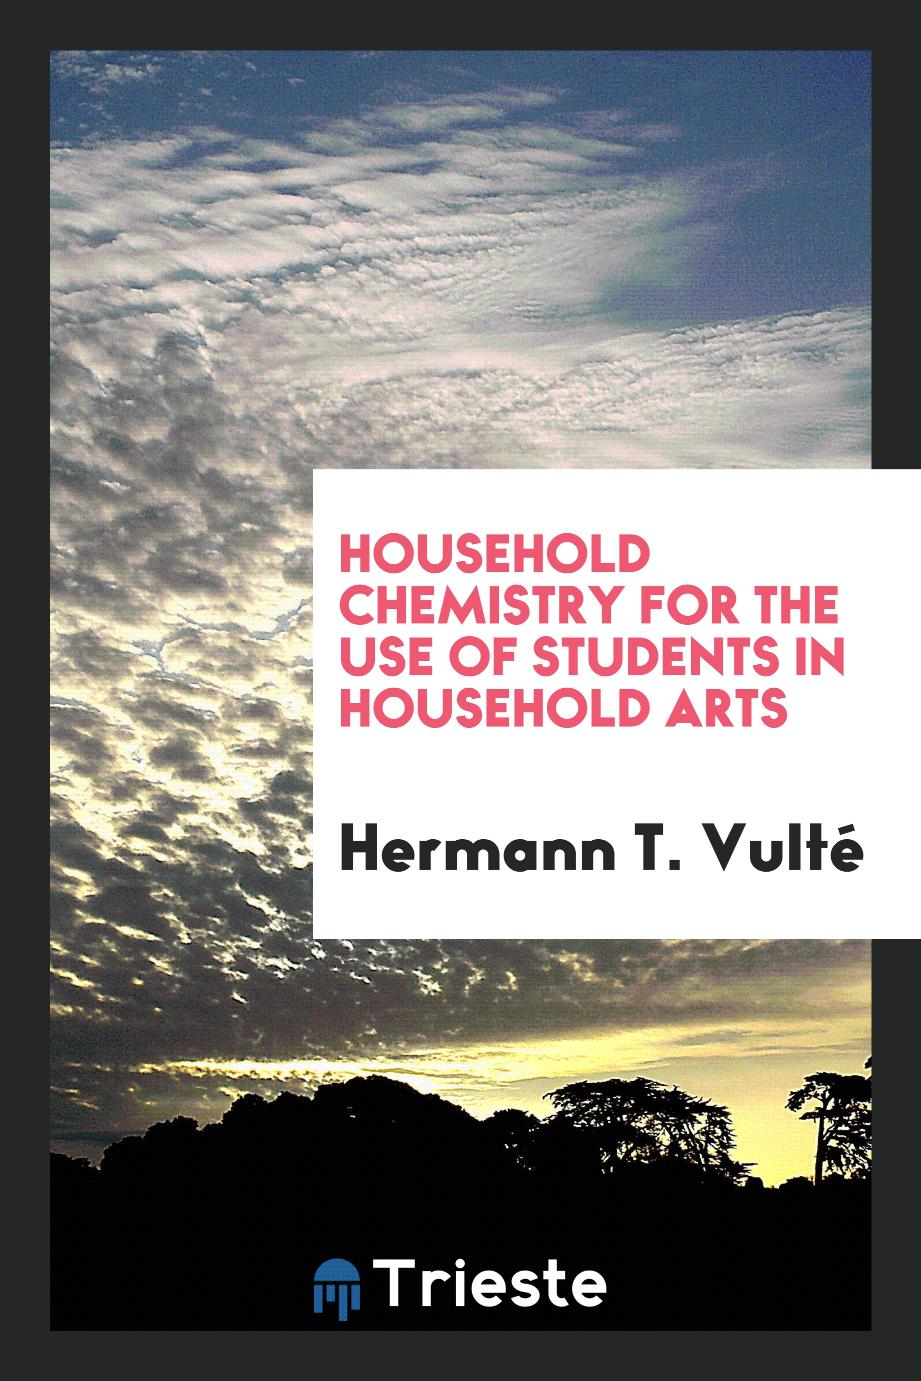 Household Chemistry for the Use of Students in Household Arts